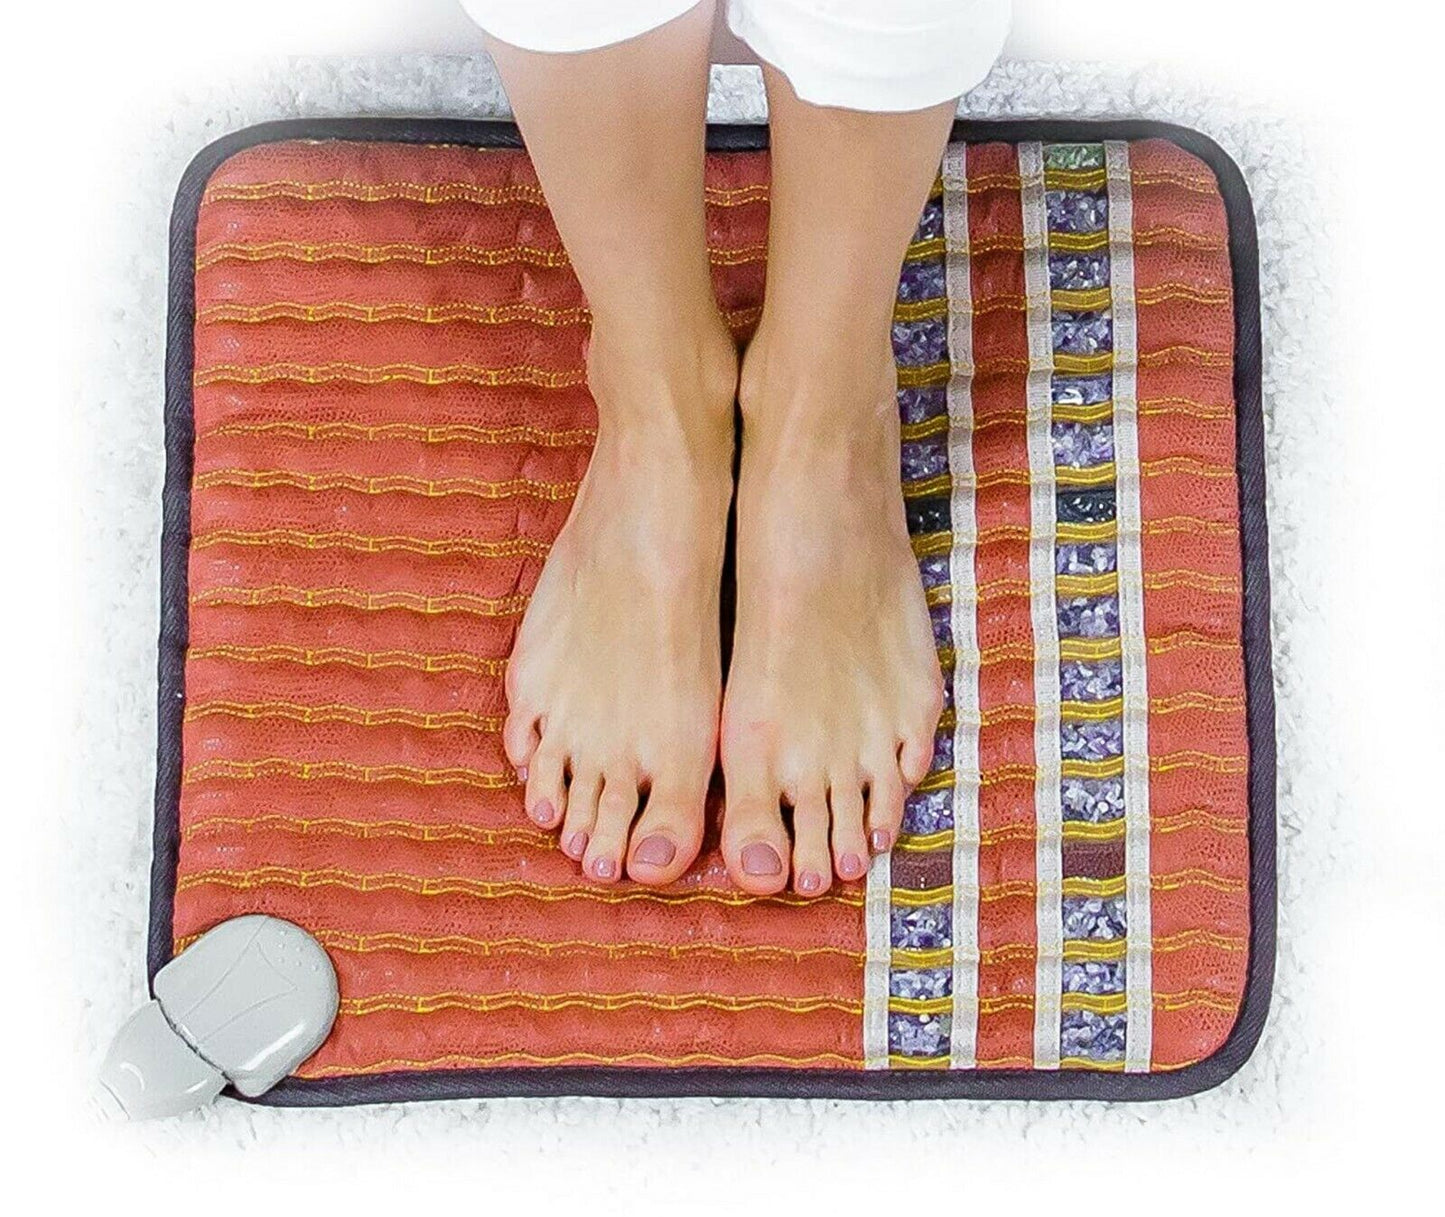 Small Far Infrared Heating Pad - 18 x 18 Heating Pad - Bio Crystal Therapy Mat - HealthyLine